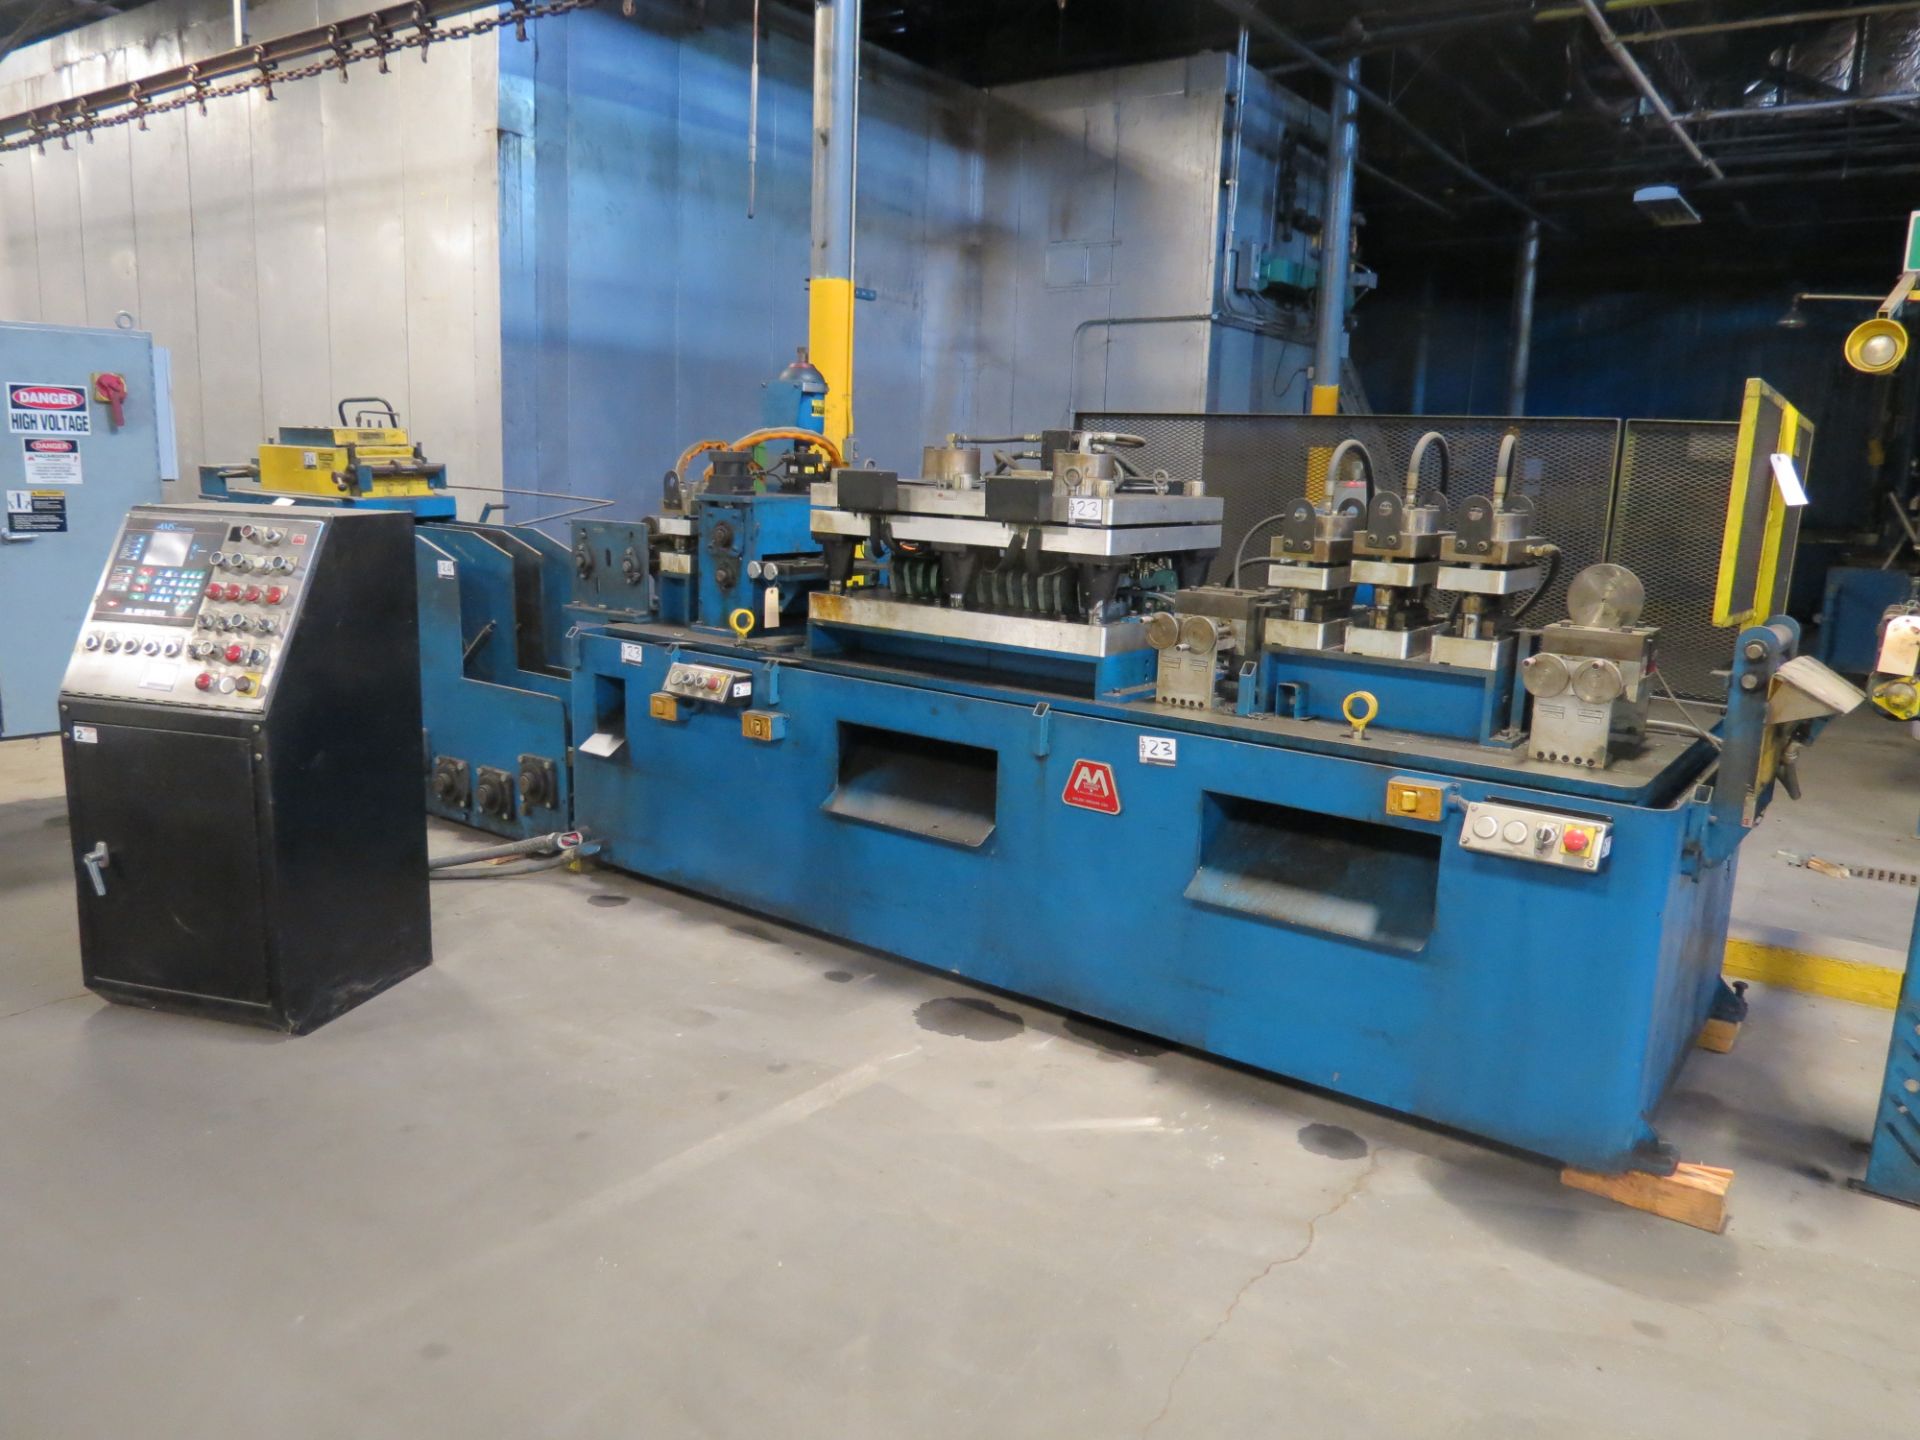 AMS Material Straightener with hyd shear & punches, XL 100 Controls - Image 4 of 7